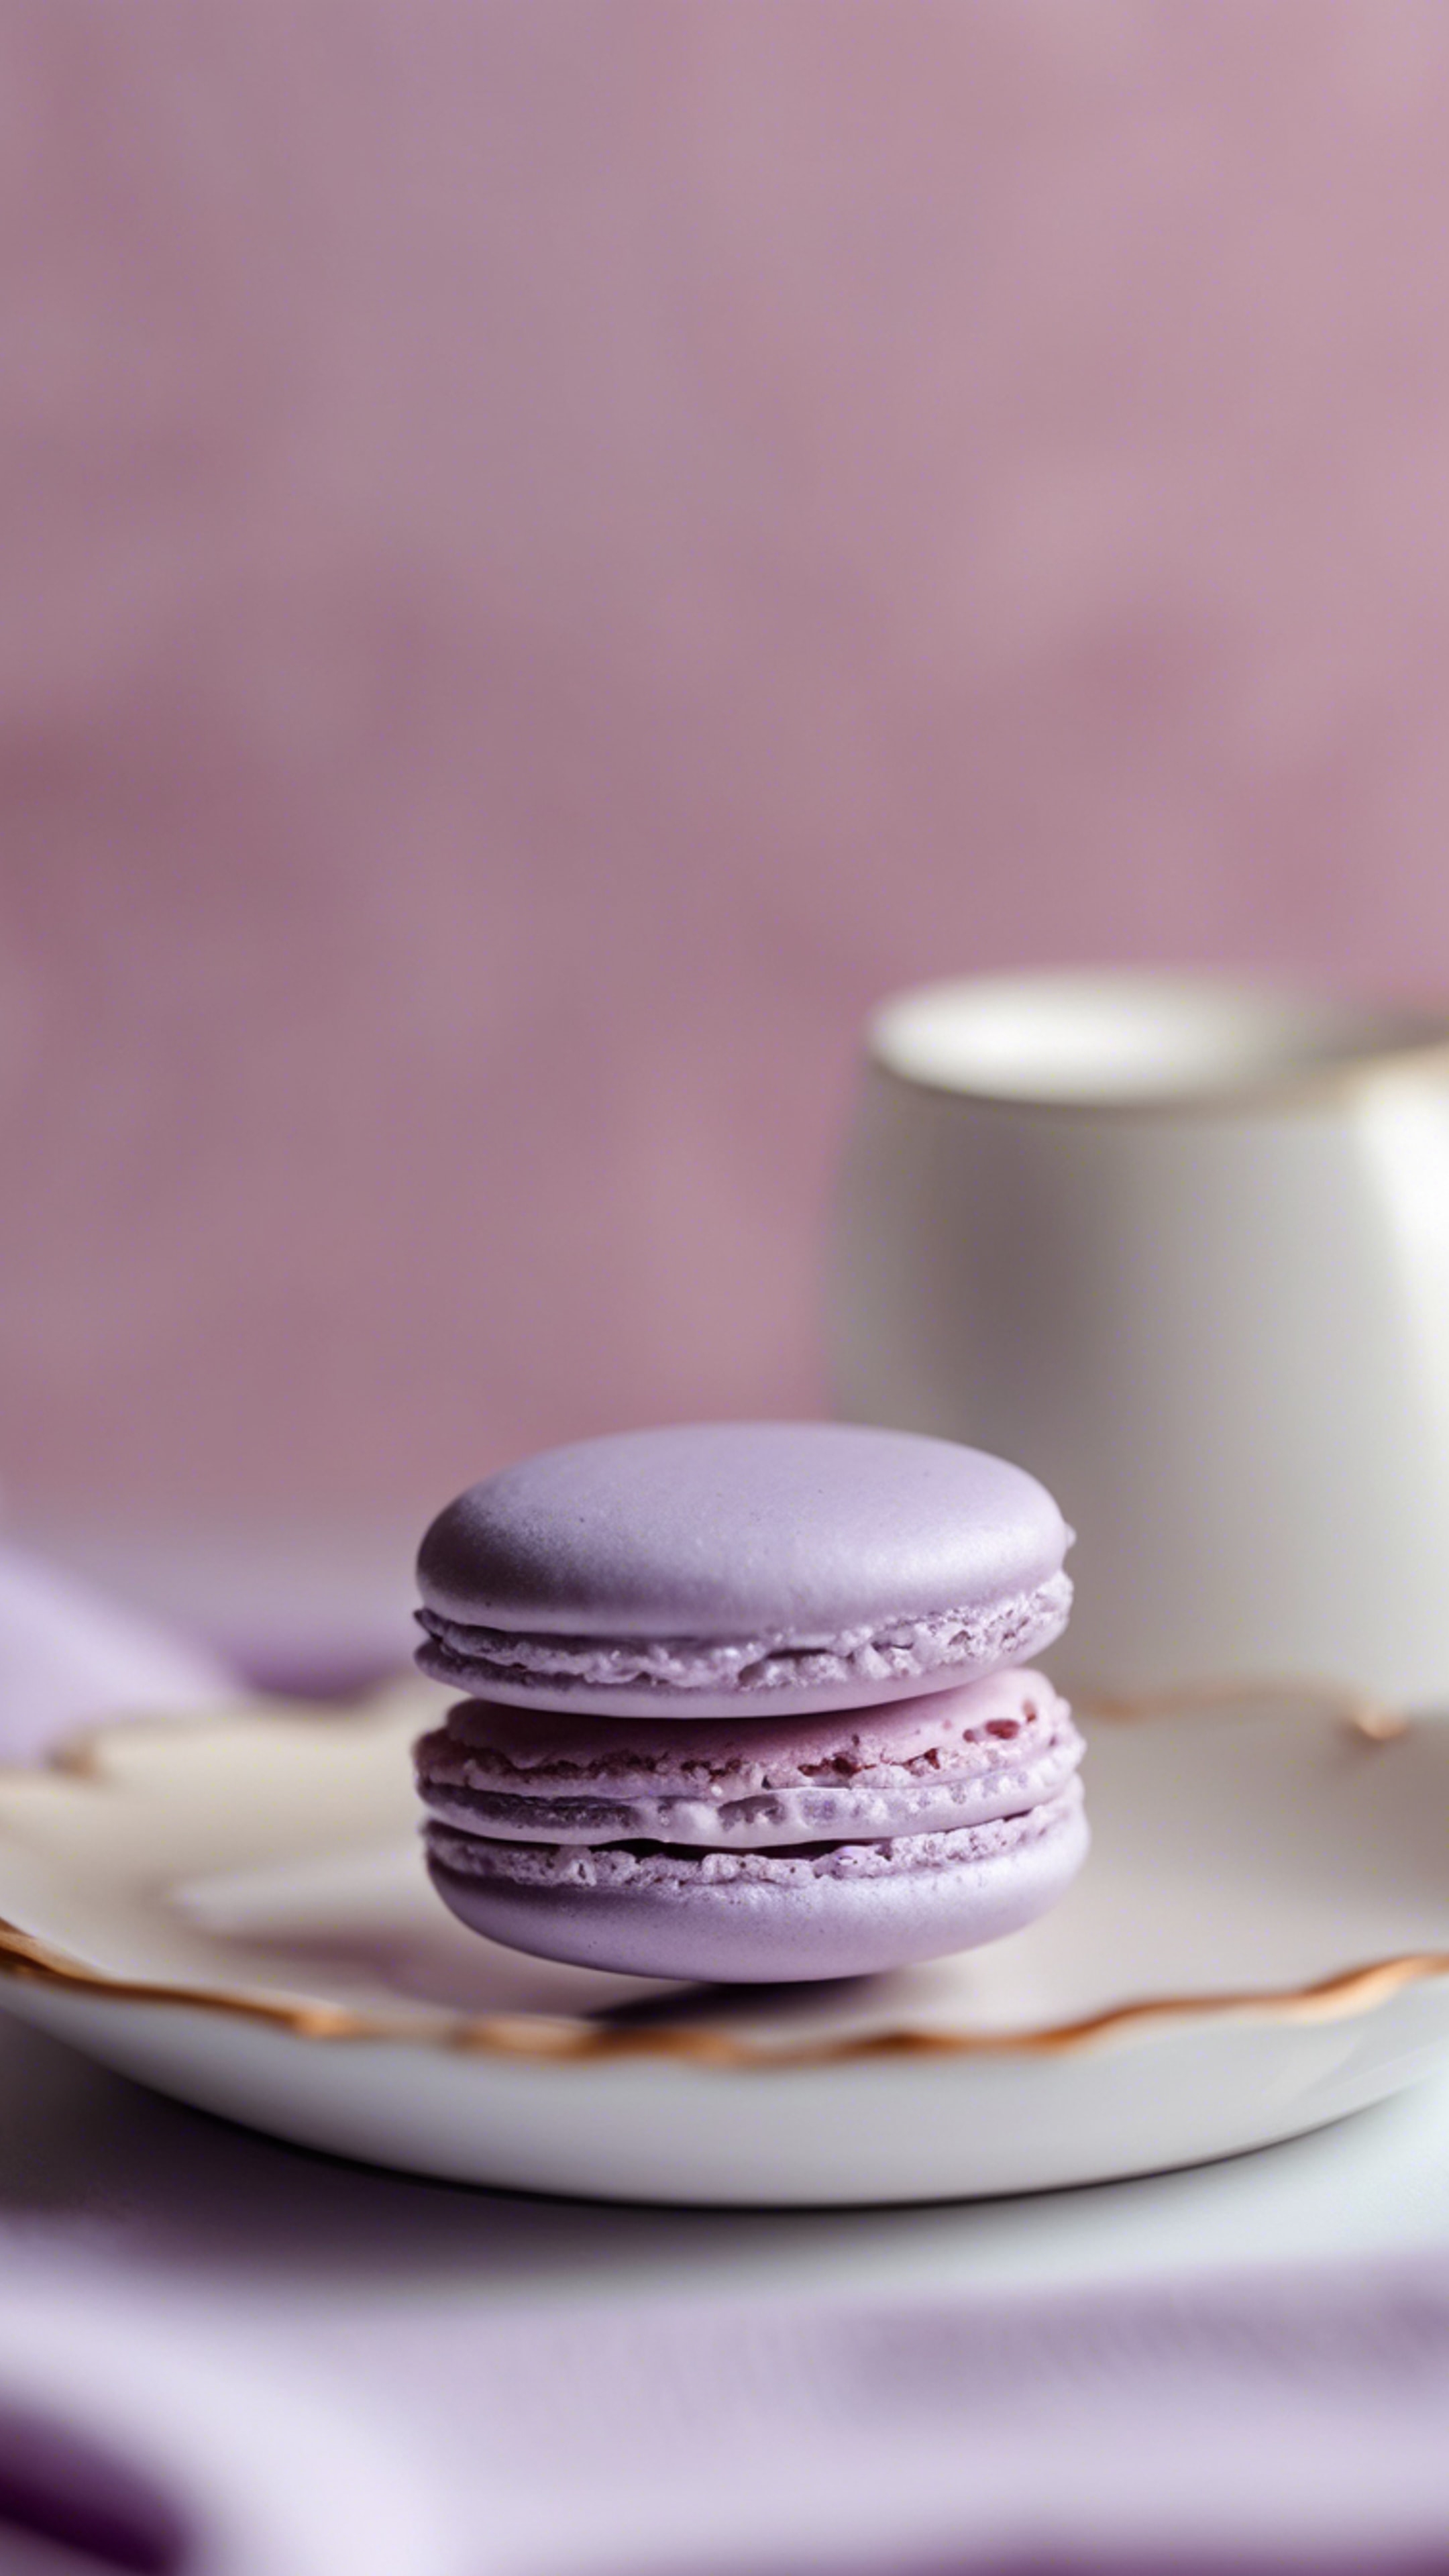 A close-up of a pastel purple-hued french macaron on a white porcelain plate. Wallpaper[867427dfb4584ec3b53c]